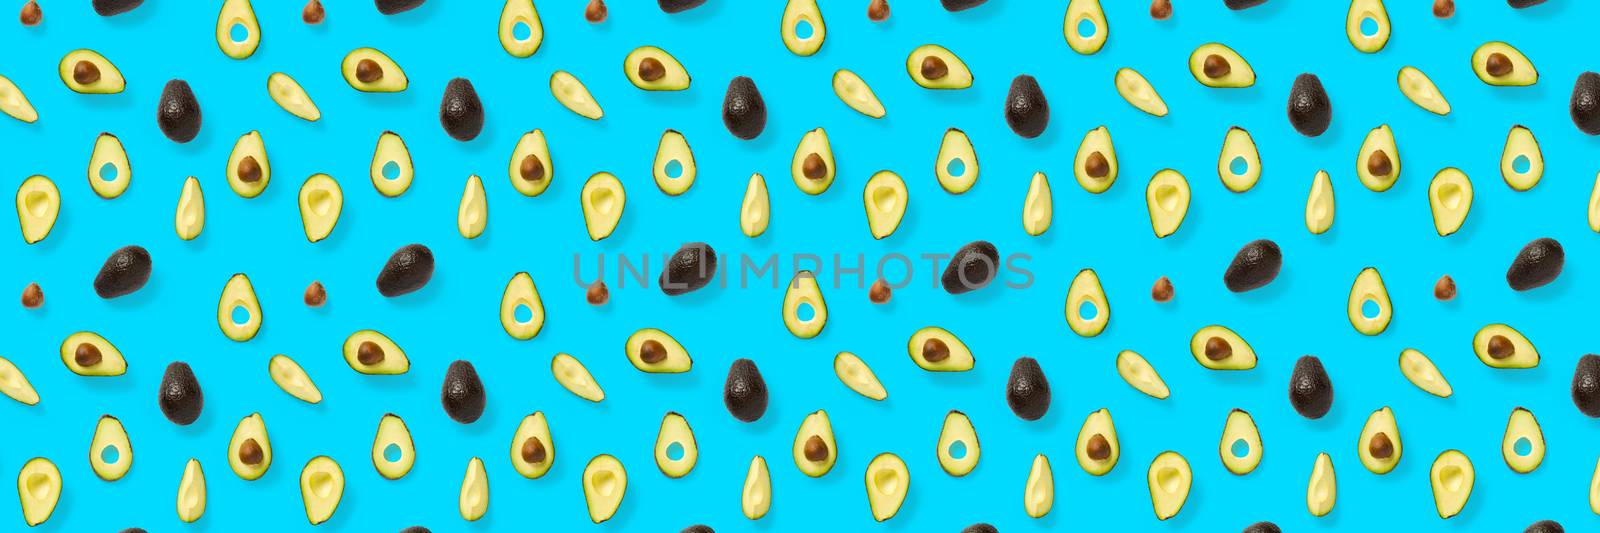 Avocado banner. Background made from isolated Avocado pieces on blue background. Flat lay of fresh ripe avocados and avacado pieces